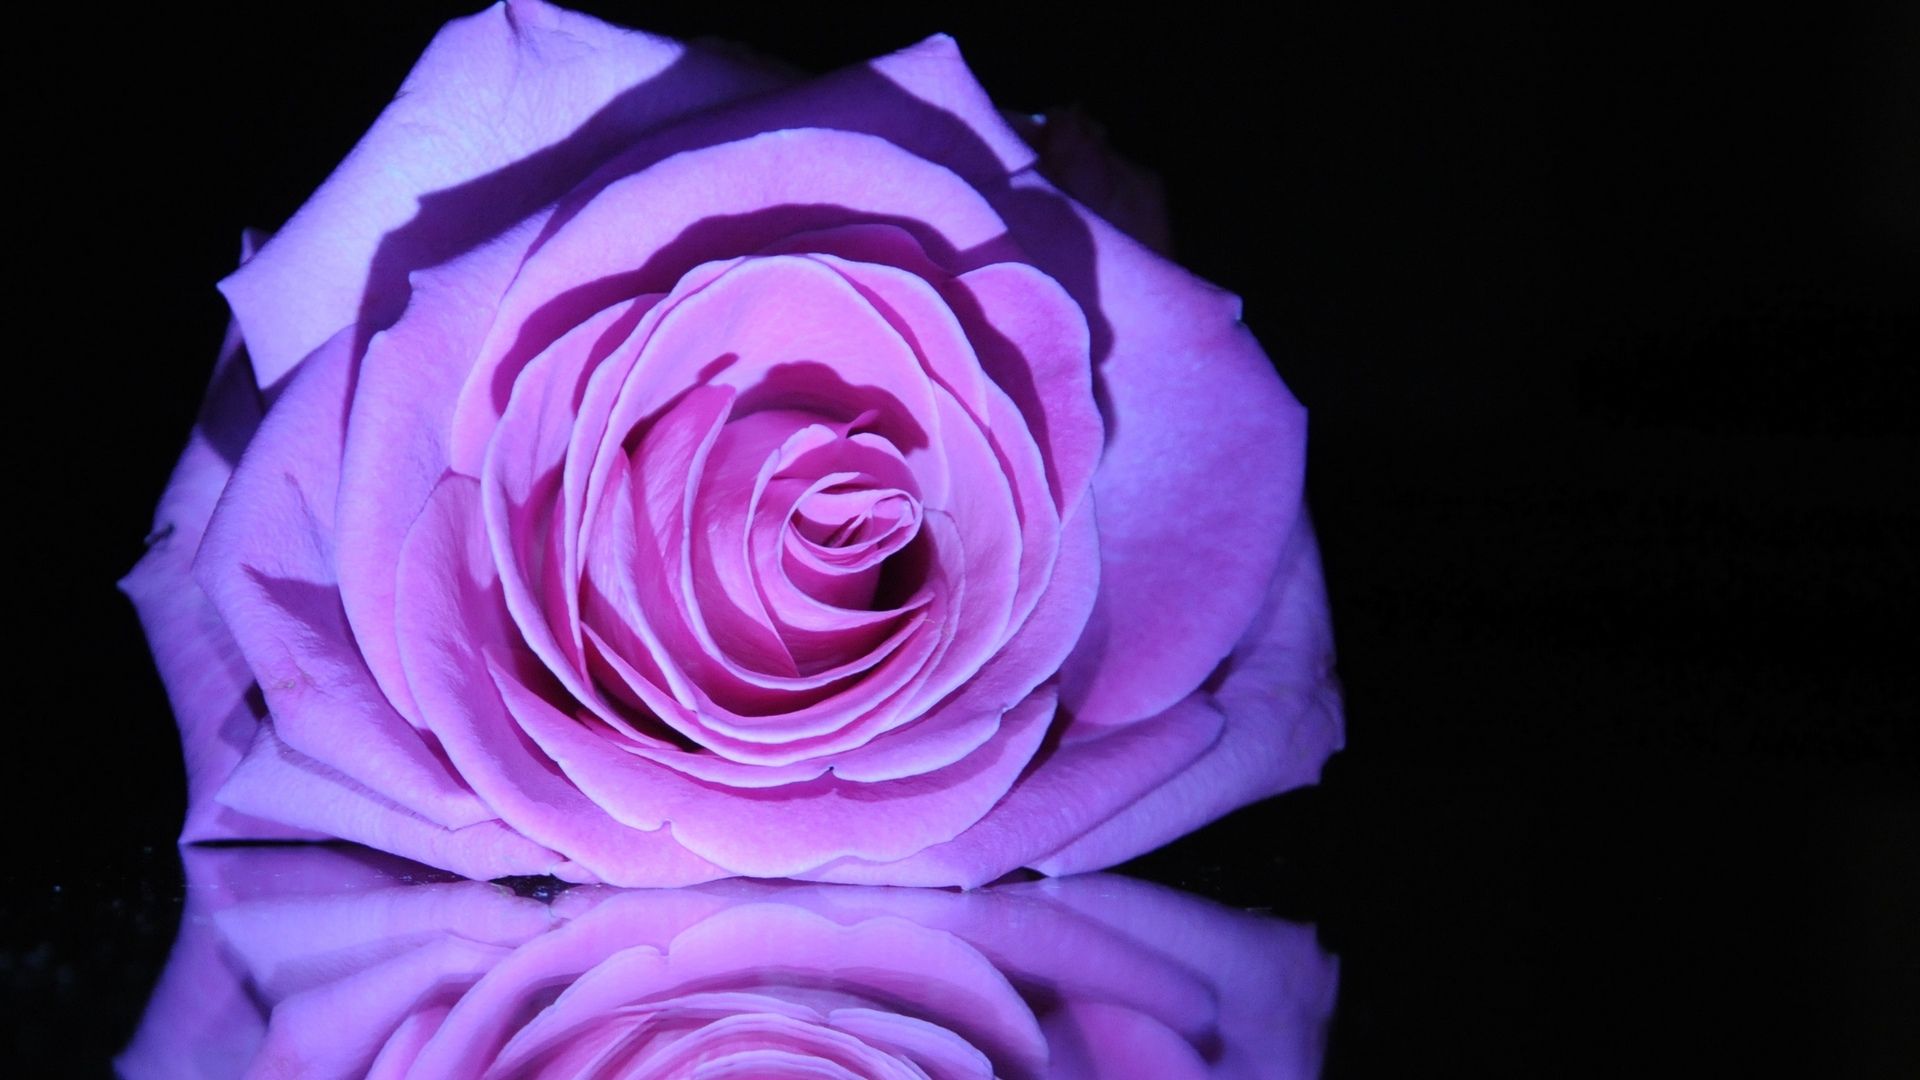 rate select rating give purple rose reflection 1 5 give purple rose. Purple roses wallpaper, Rose flower hd, Rose flower wallpaper